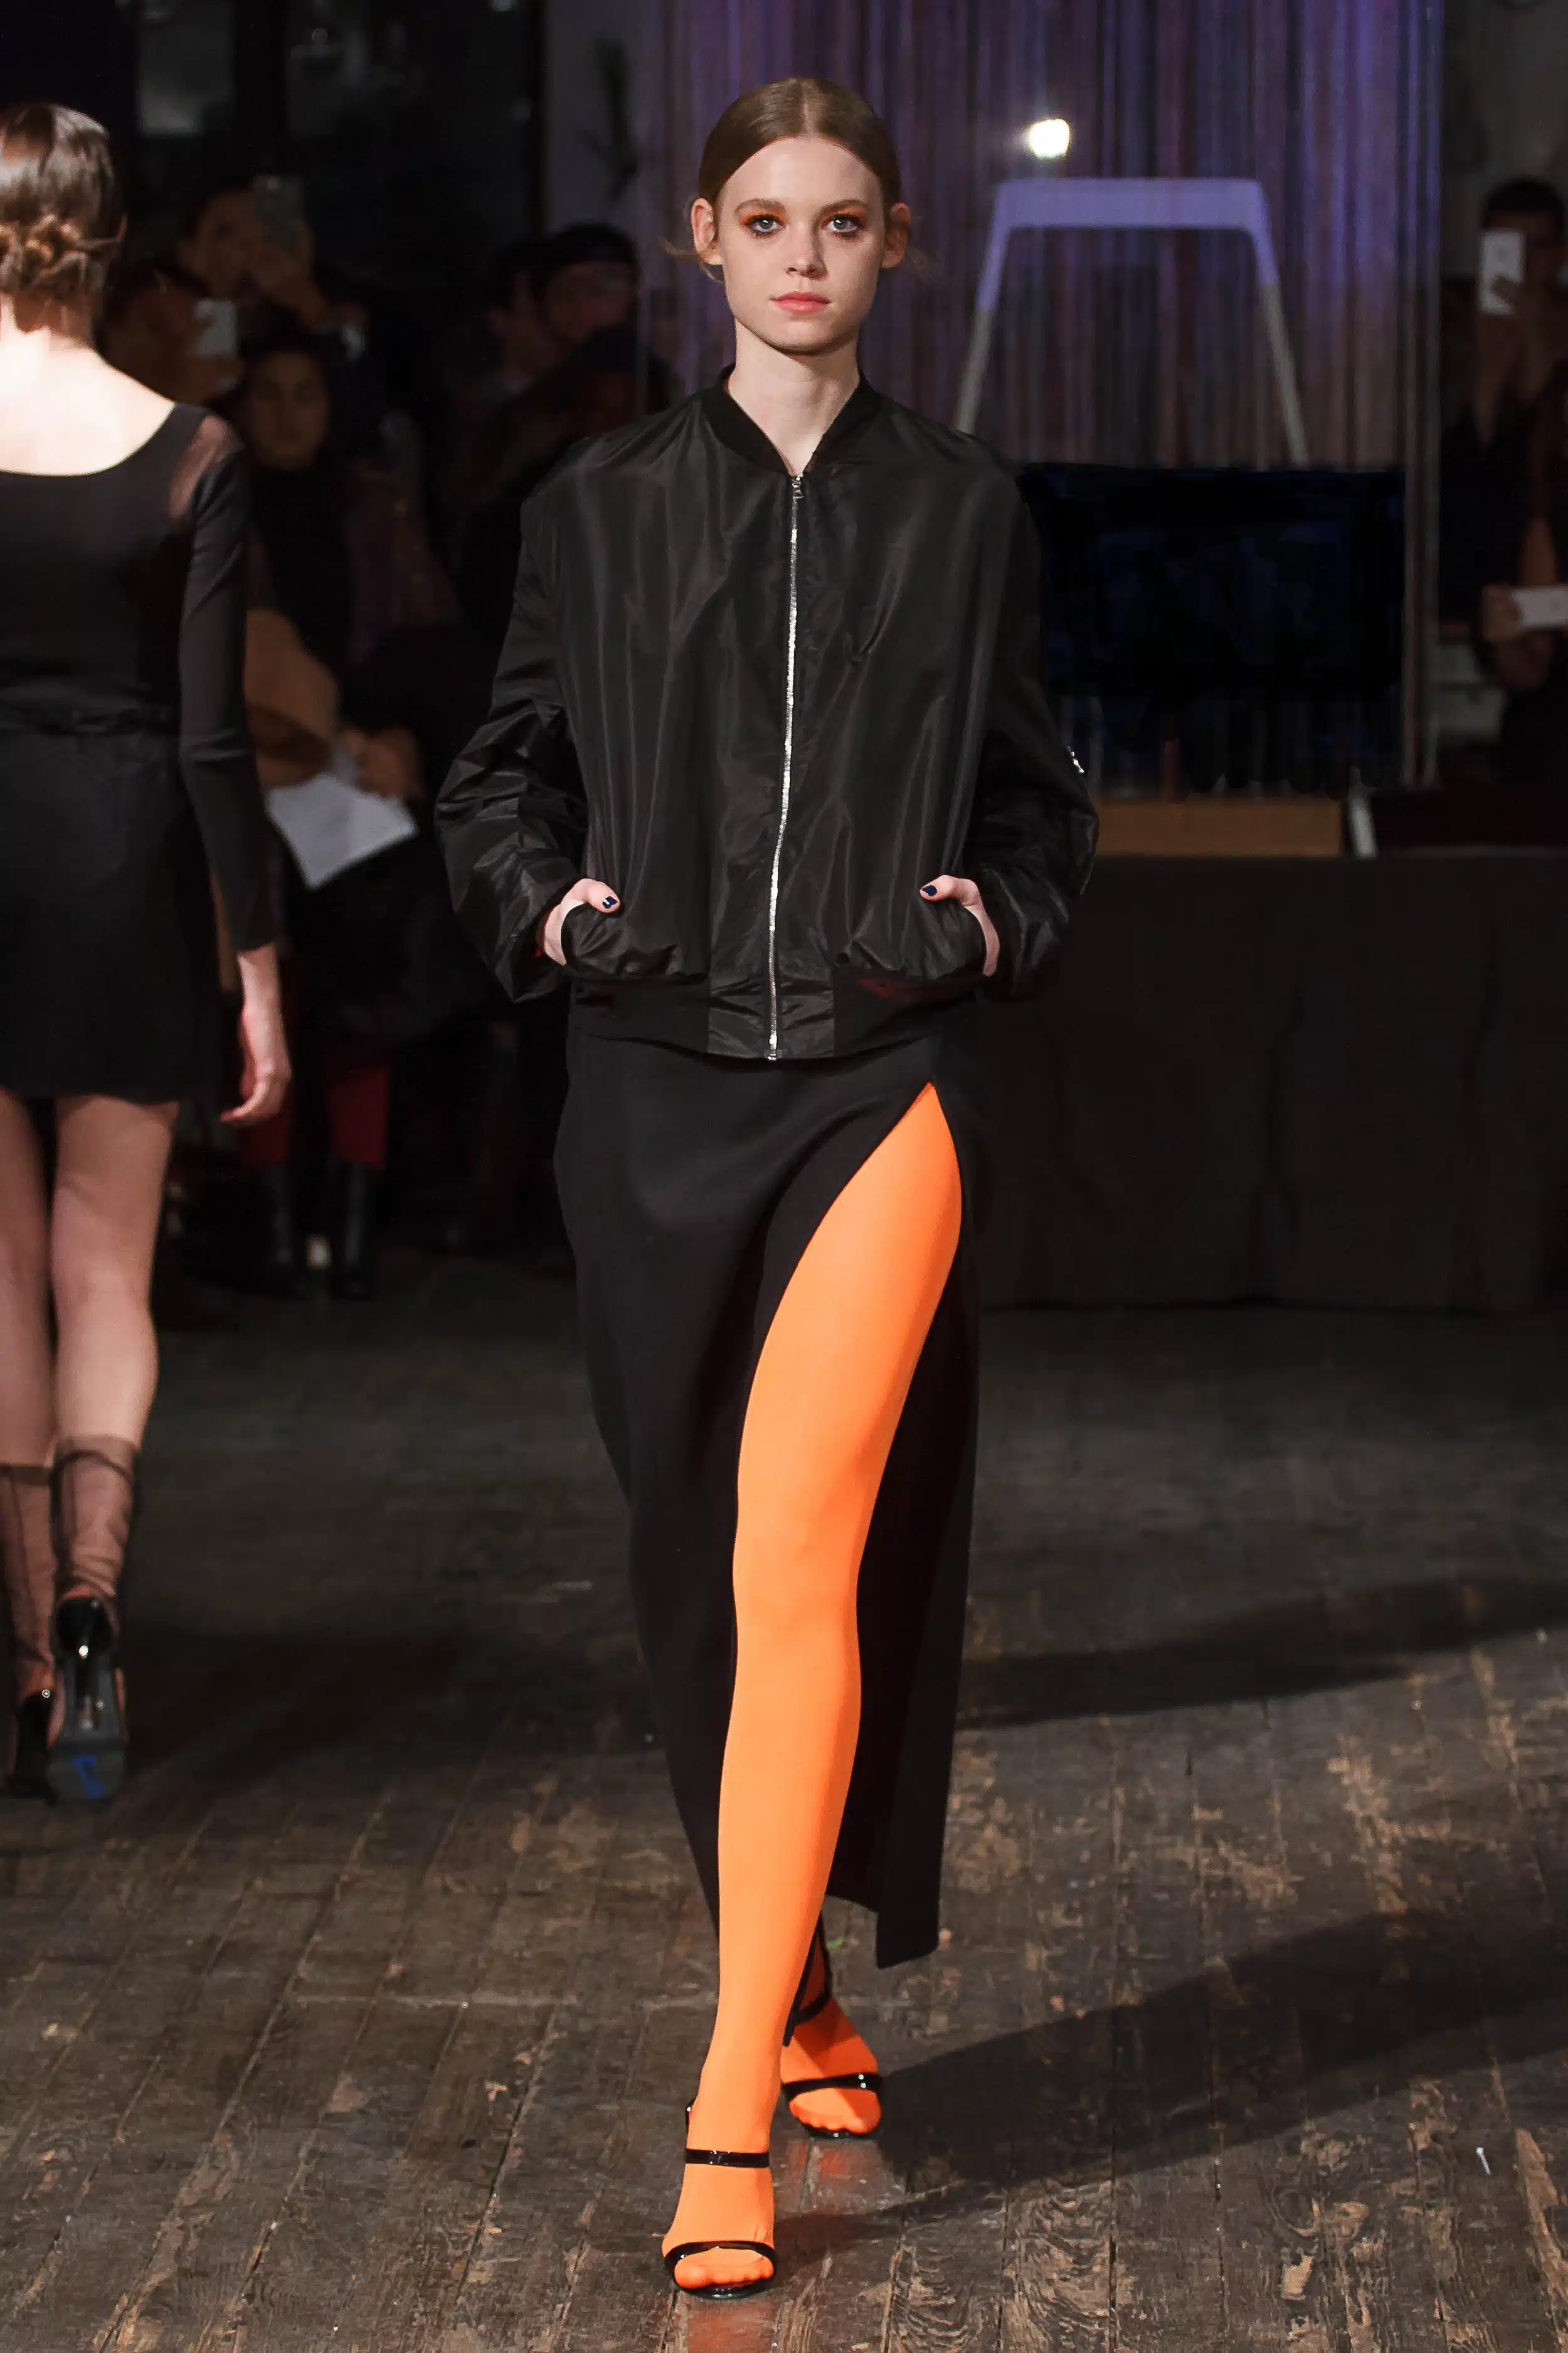 Image from FW17 SHOW Collection